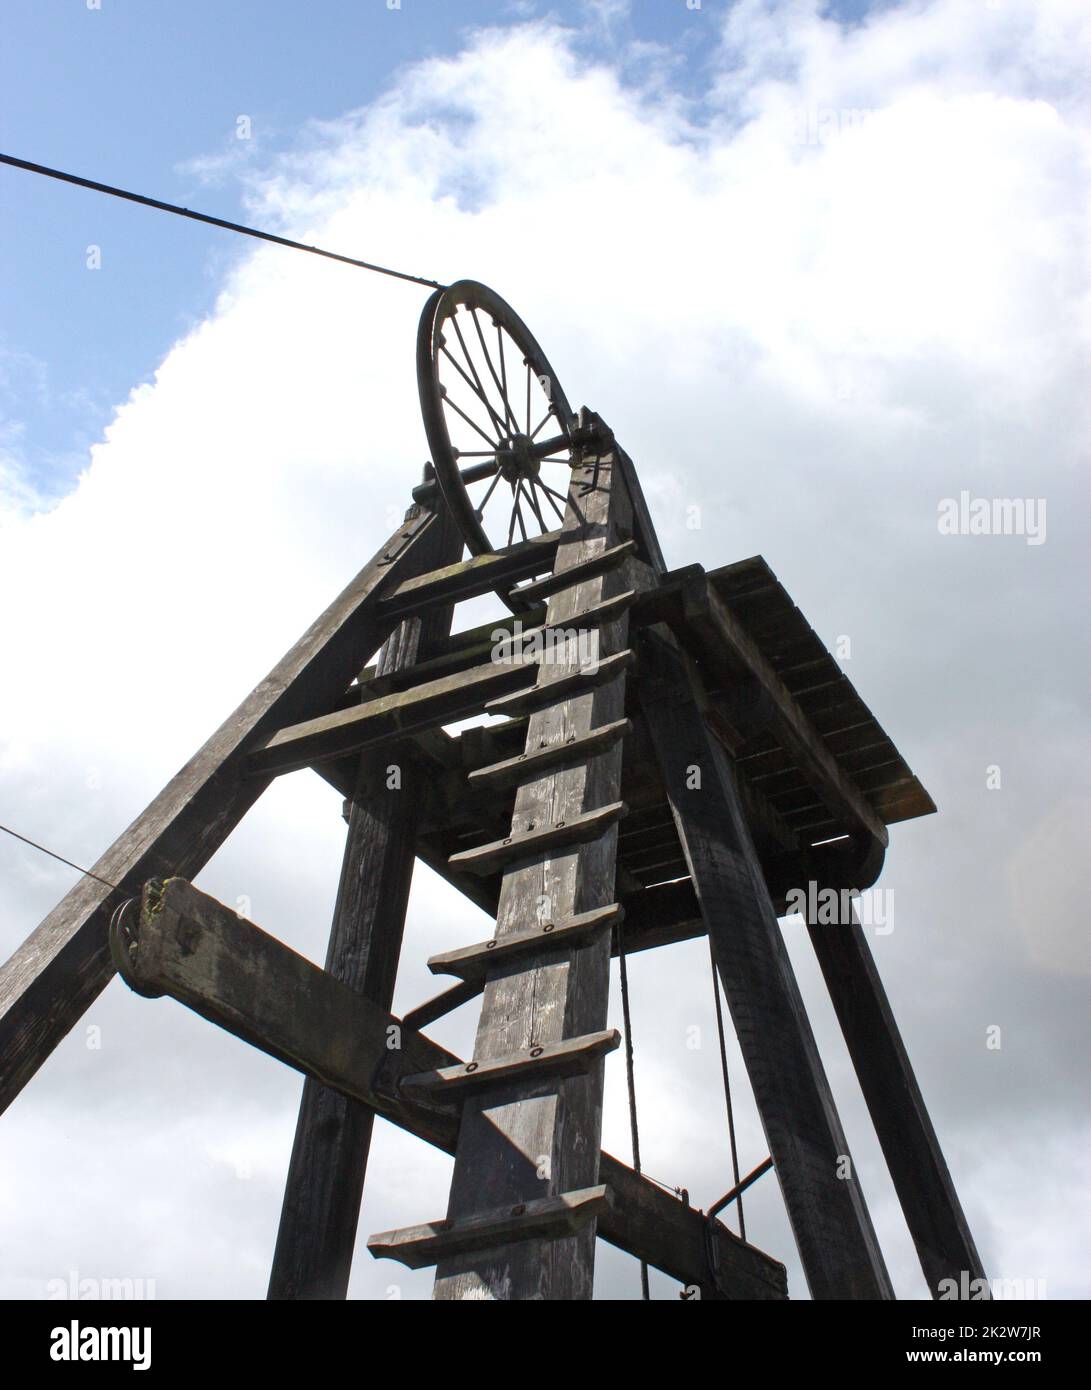 An Old Coal Pit Wooden Winding Headstocks. Stock Photo